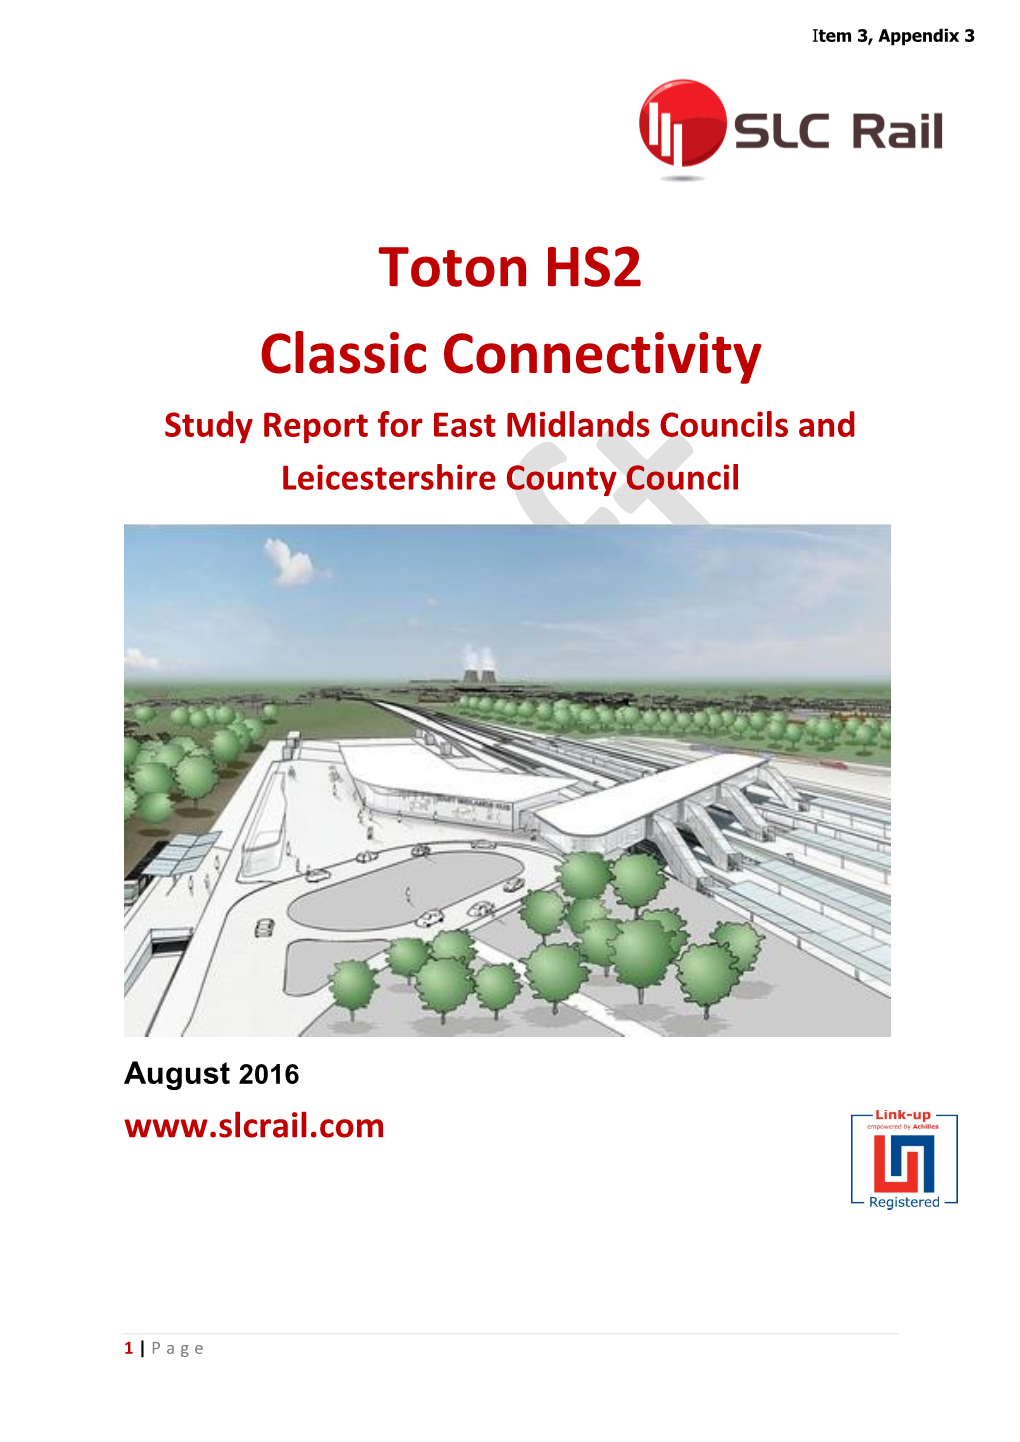 Toton HS2 Classic Connectivity Study Report for East Midlands Councils and Leicestershire County Council